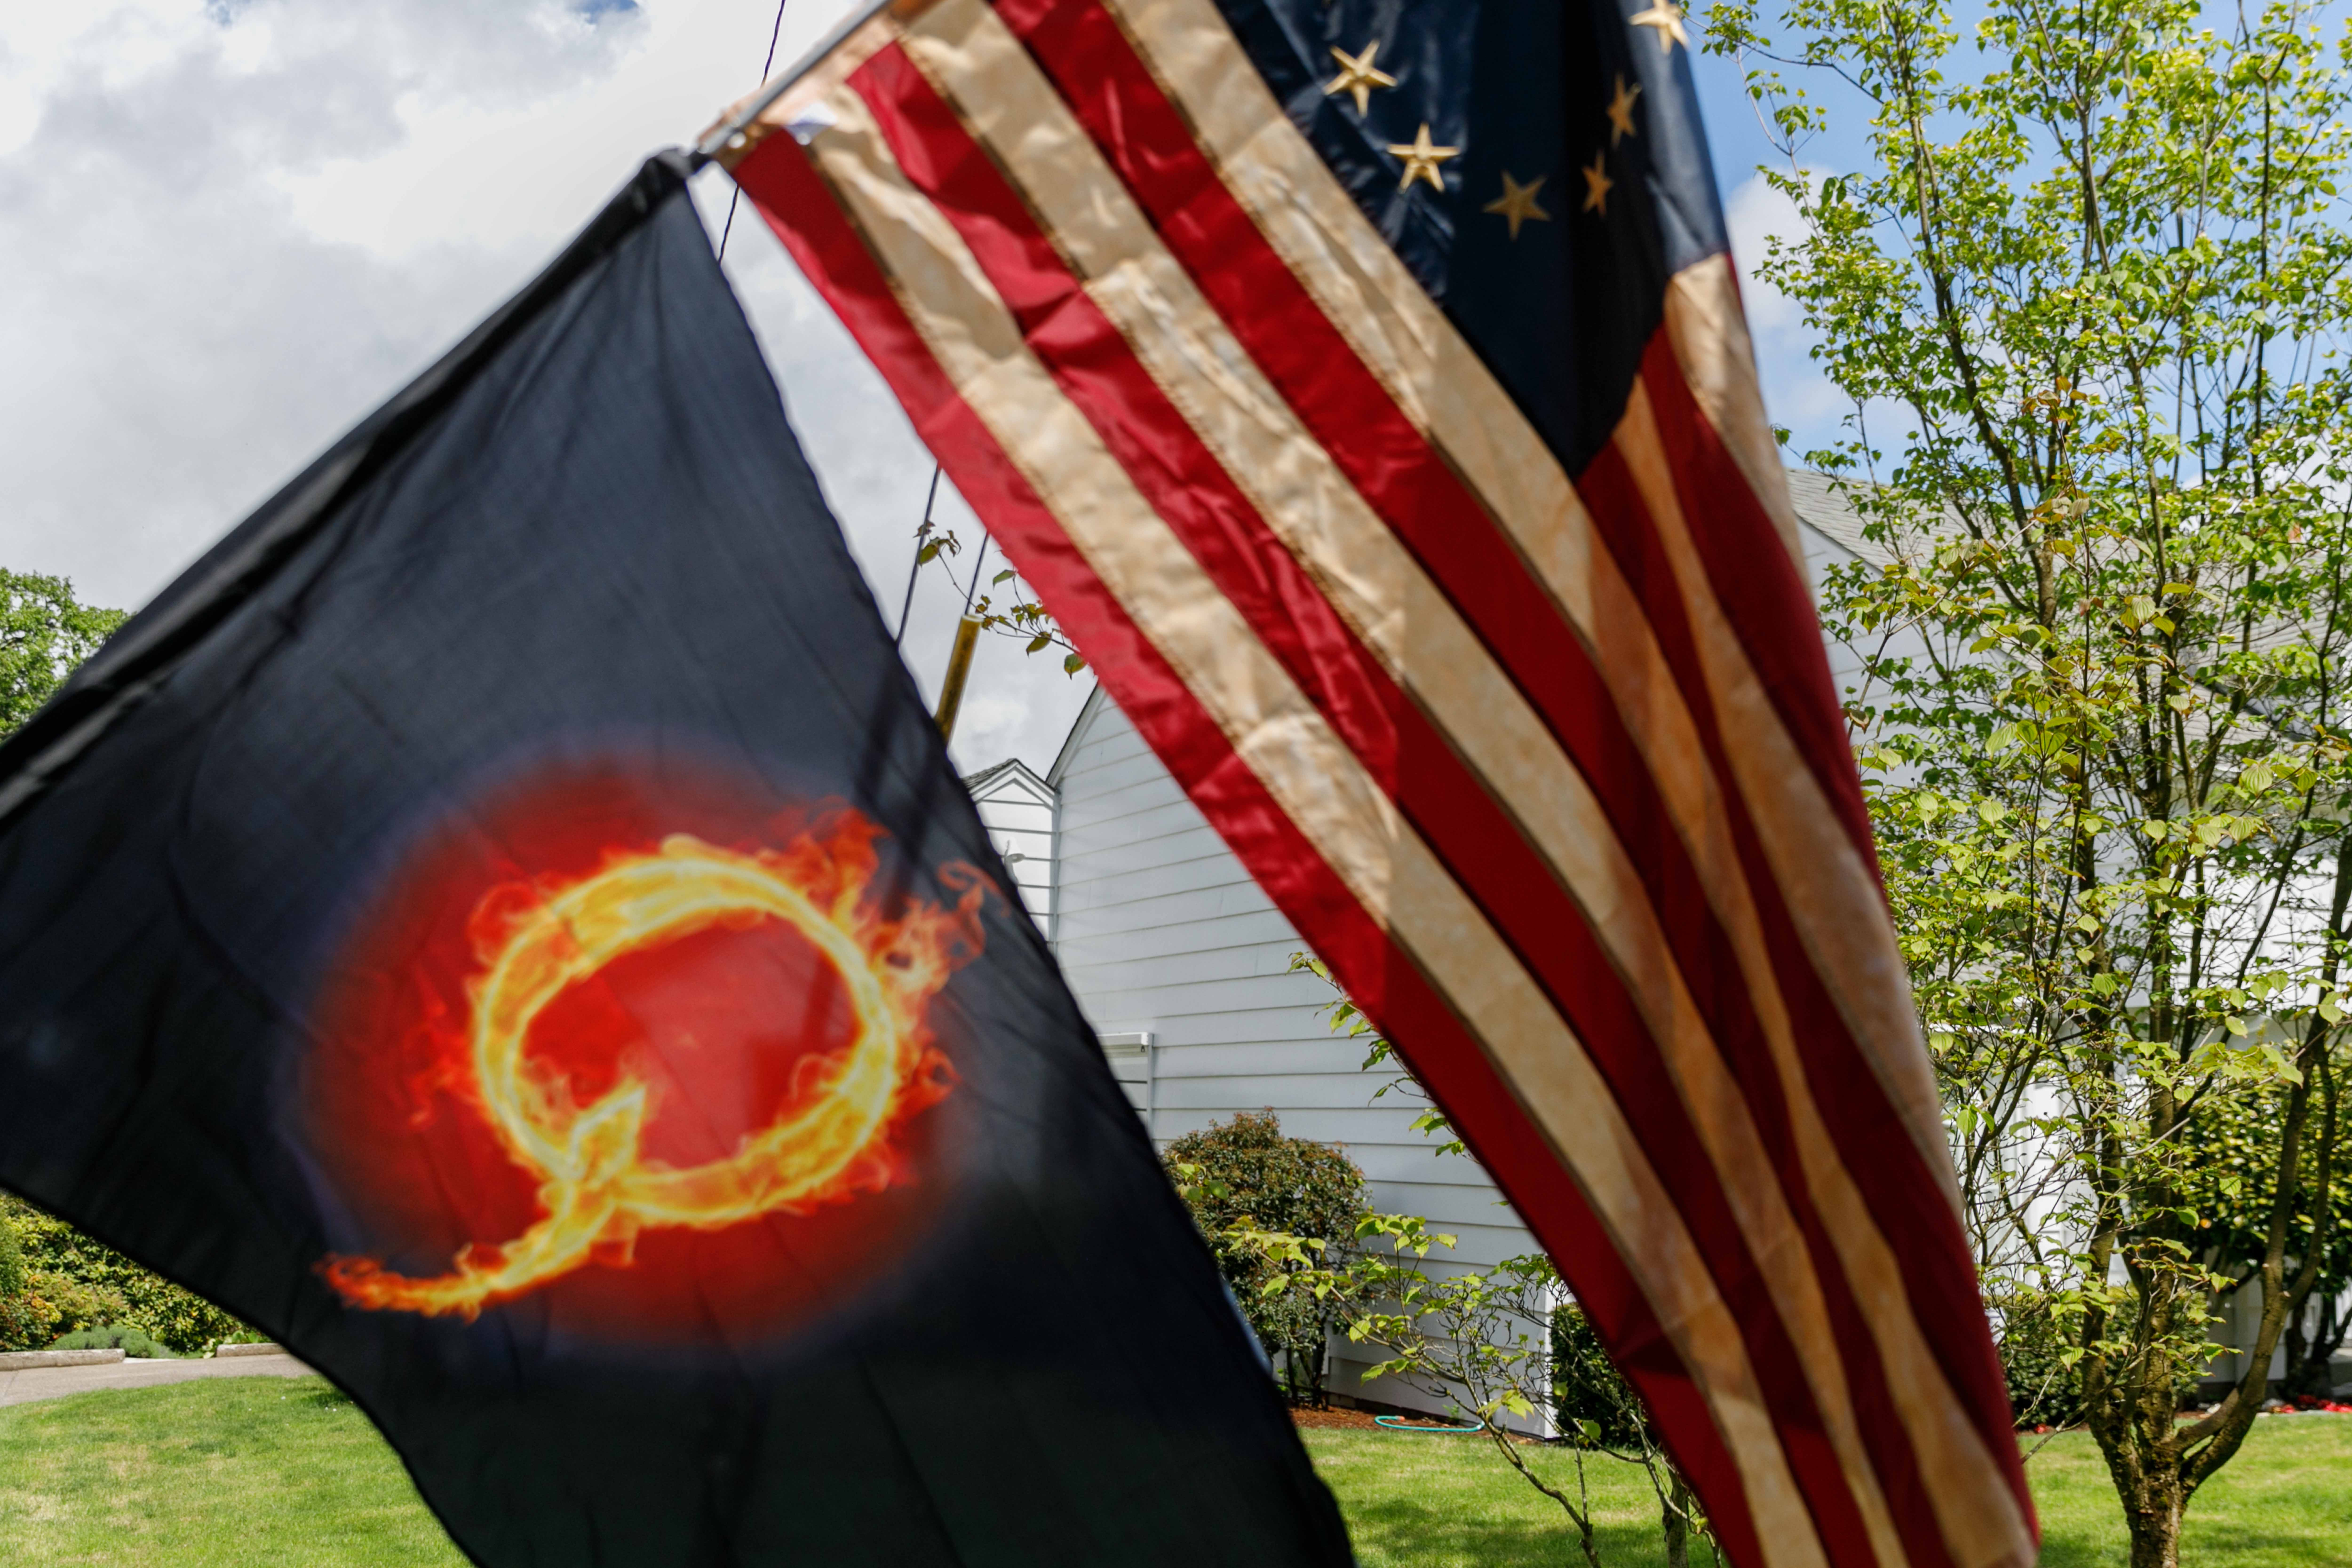 A flag with the letter Q on fire, hanging beside a colonial U.S. flag.